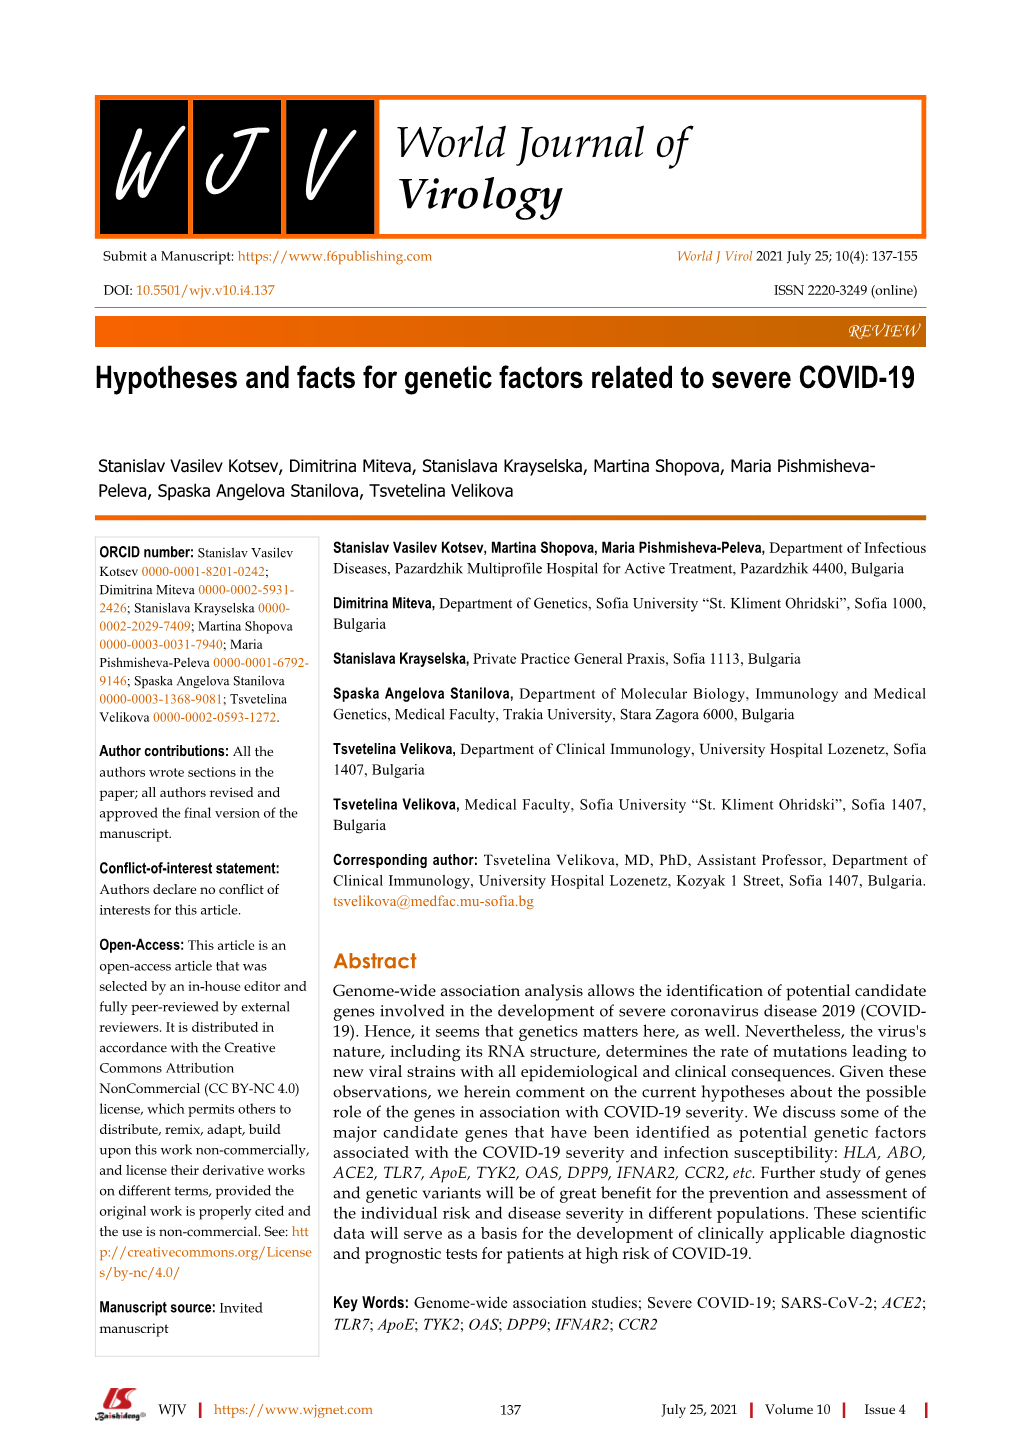 Hypotheses and Facts for Genetic Factors Related to Severe COVID-19